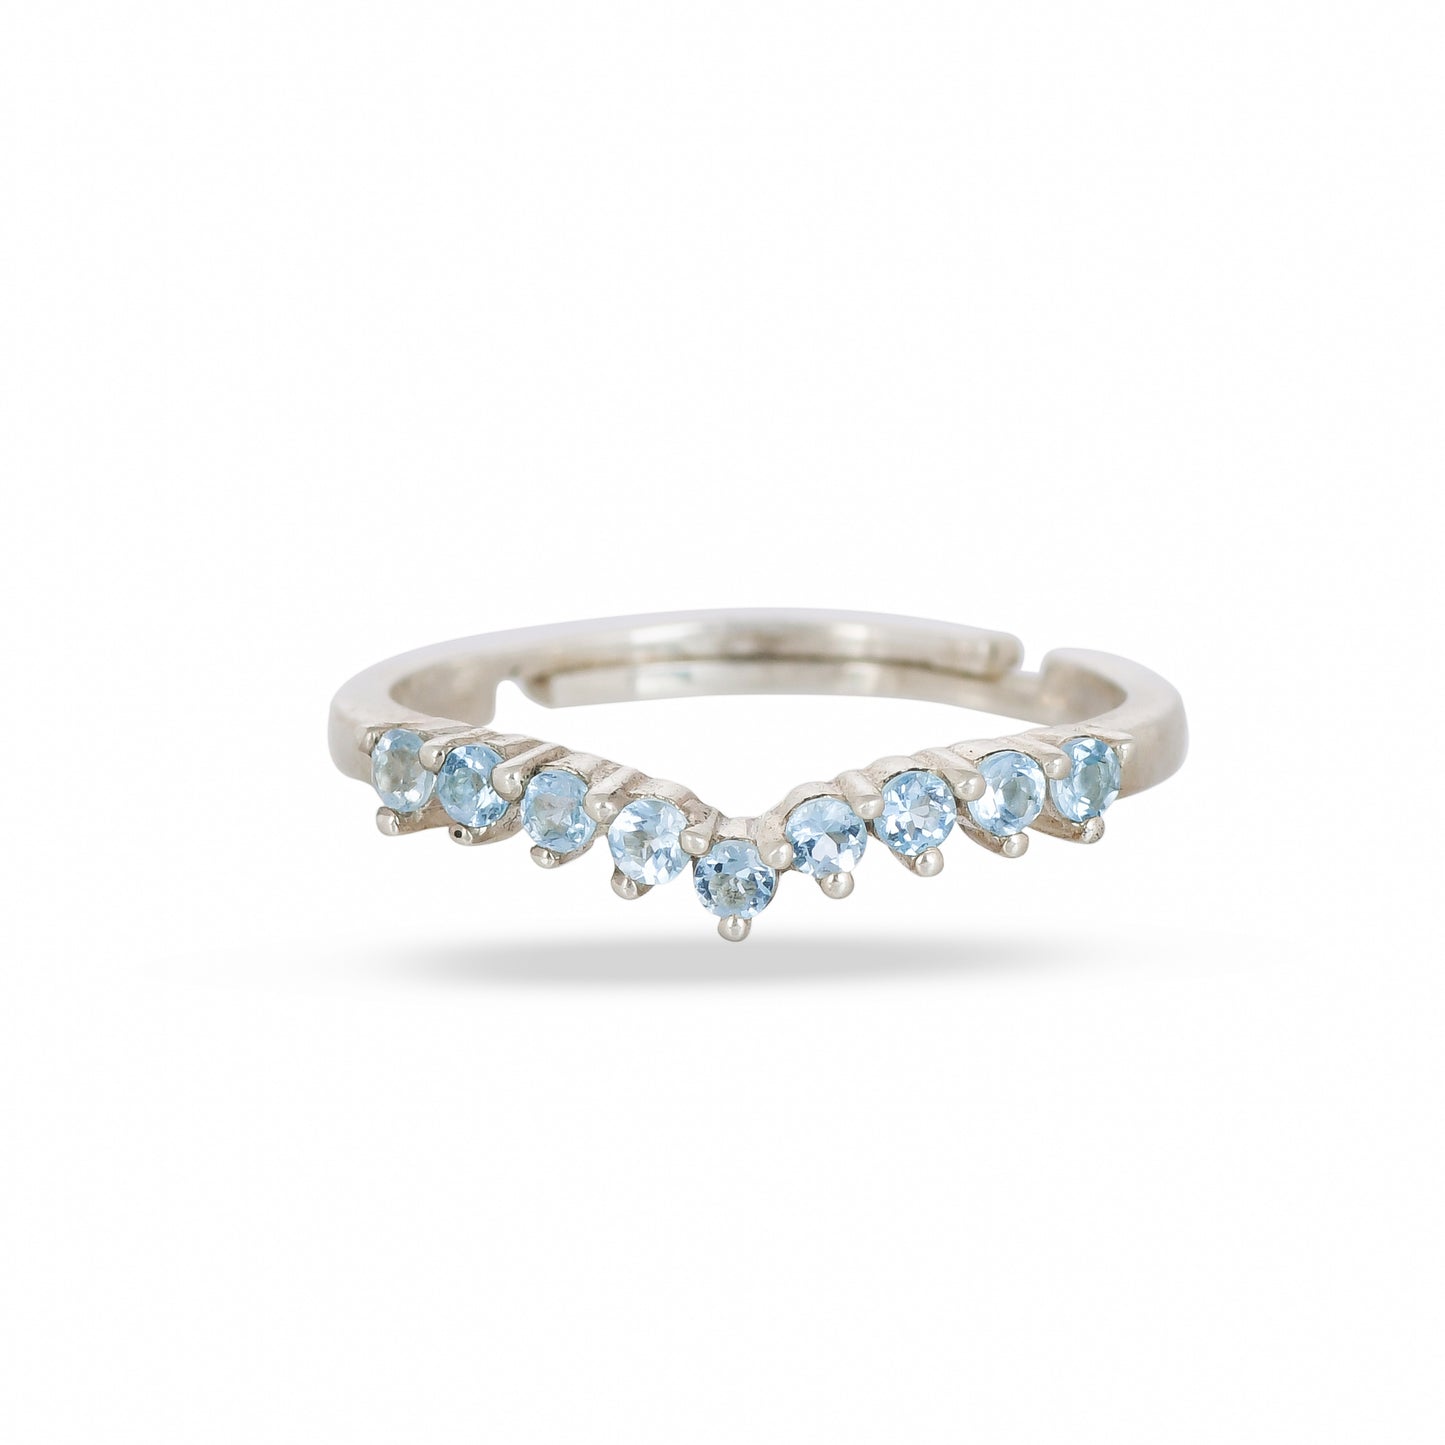 Natural Blue Topaz Chevron Silver Ring - From Purl Purl